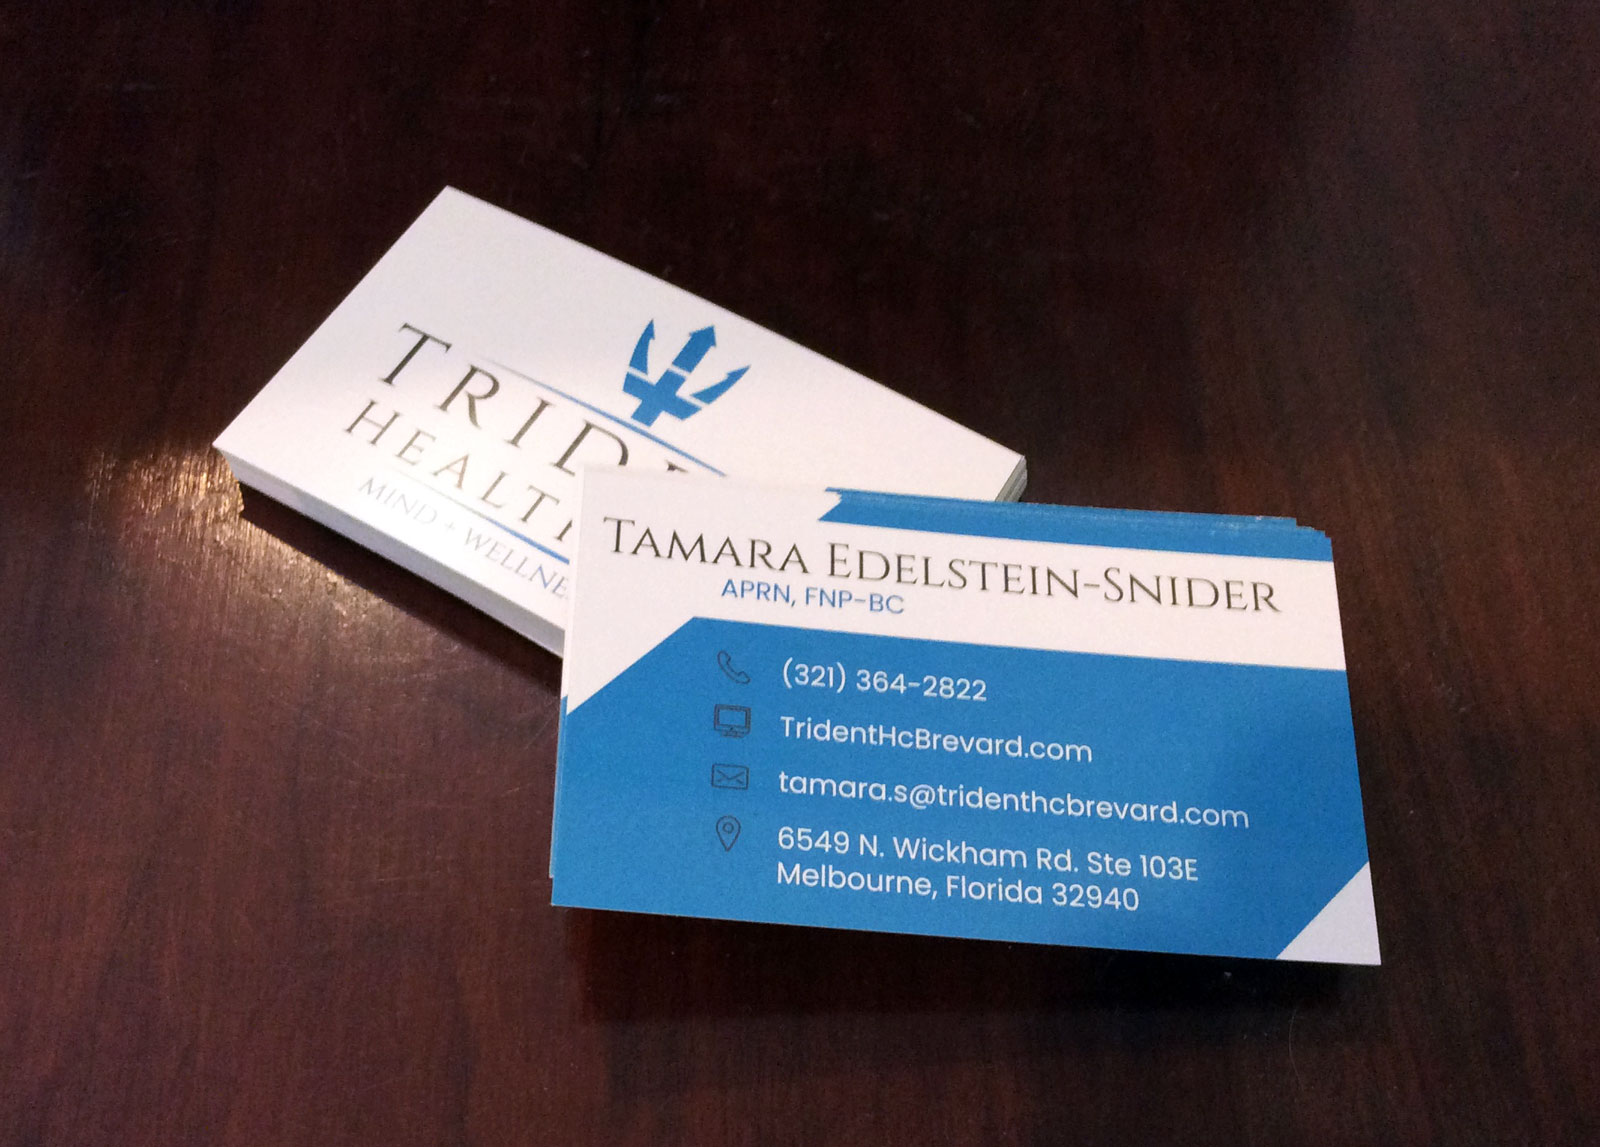 New Business Cards Designed & Printed for Trident Healthcare